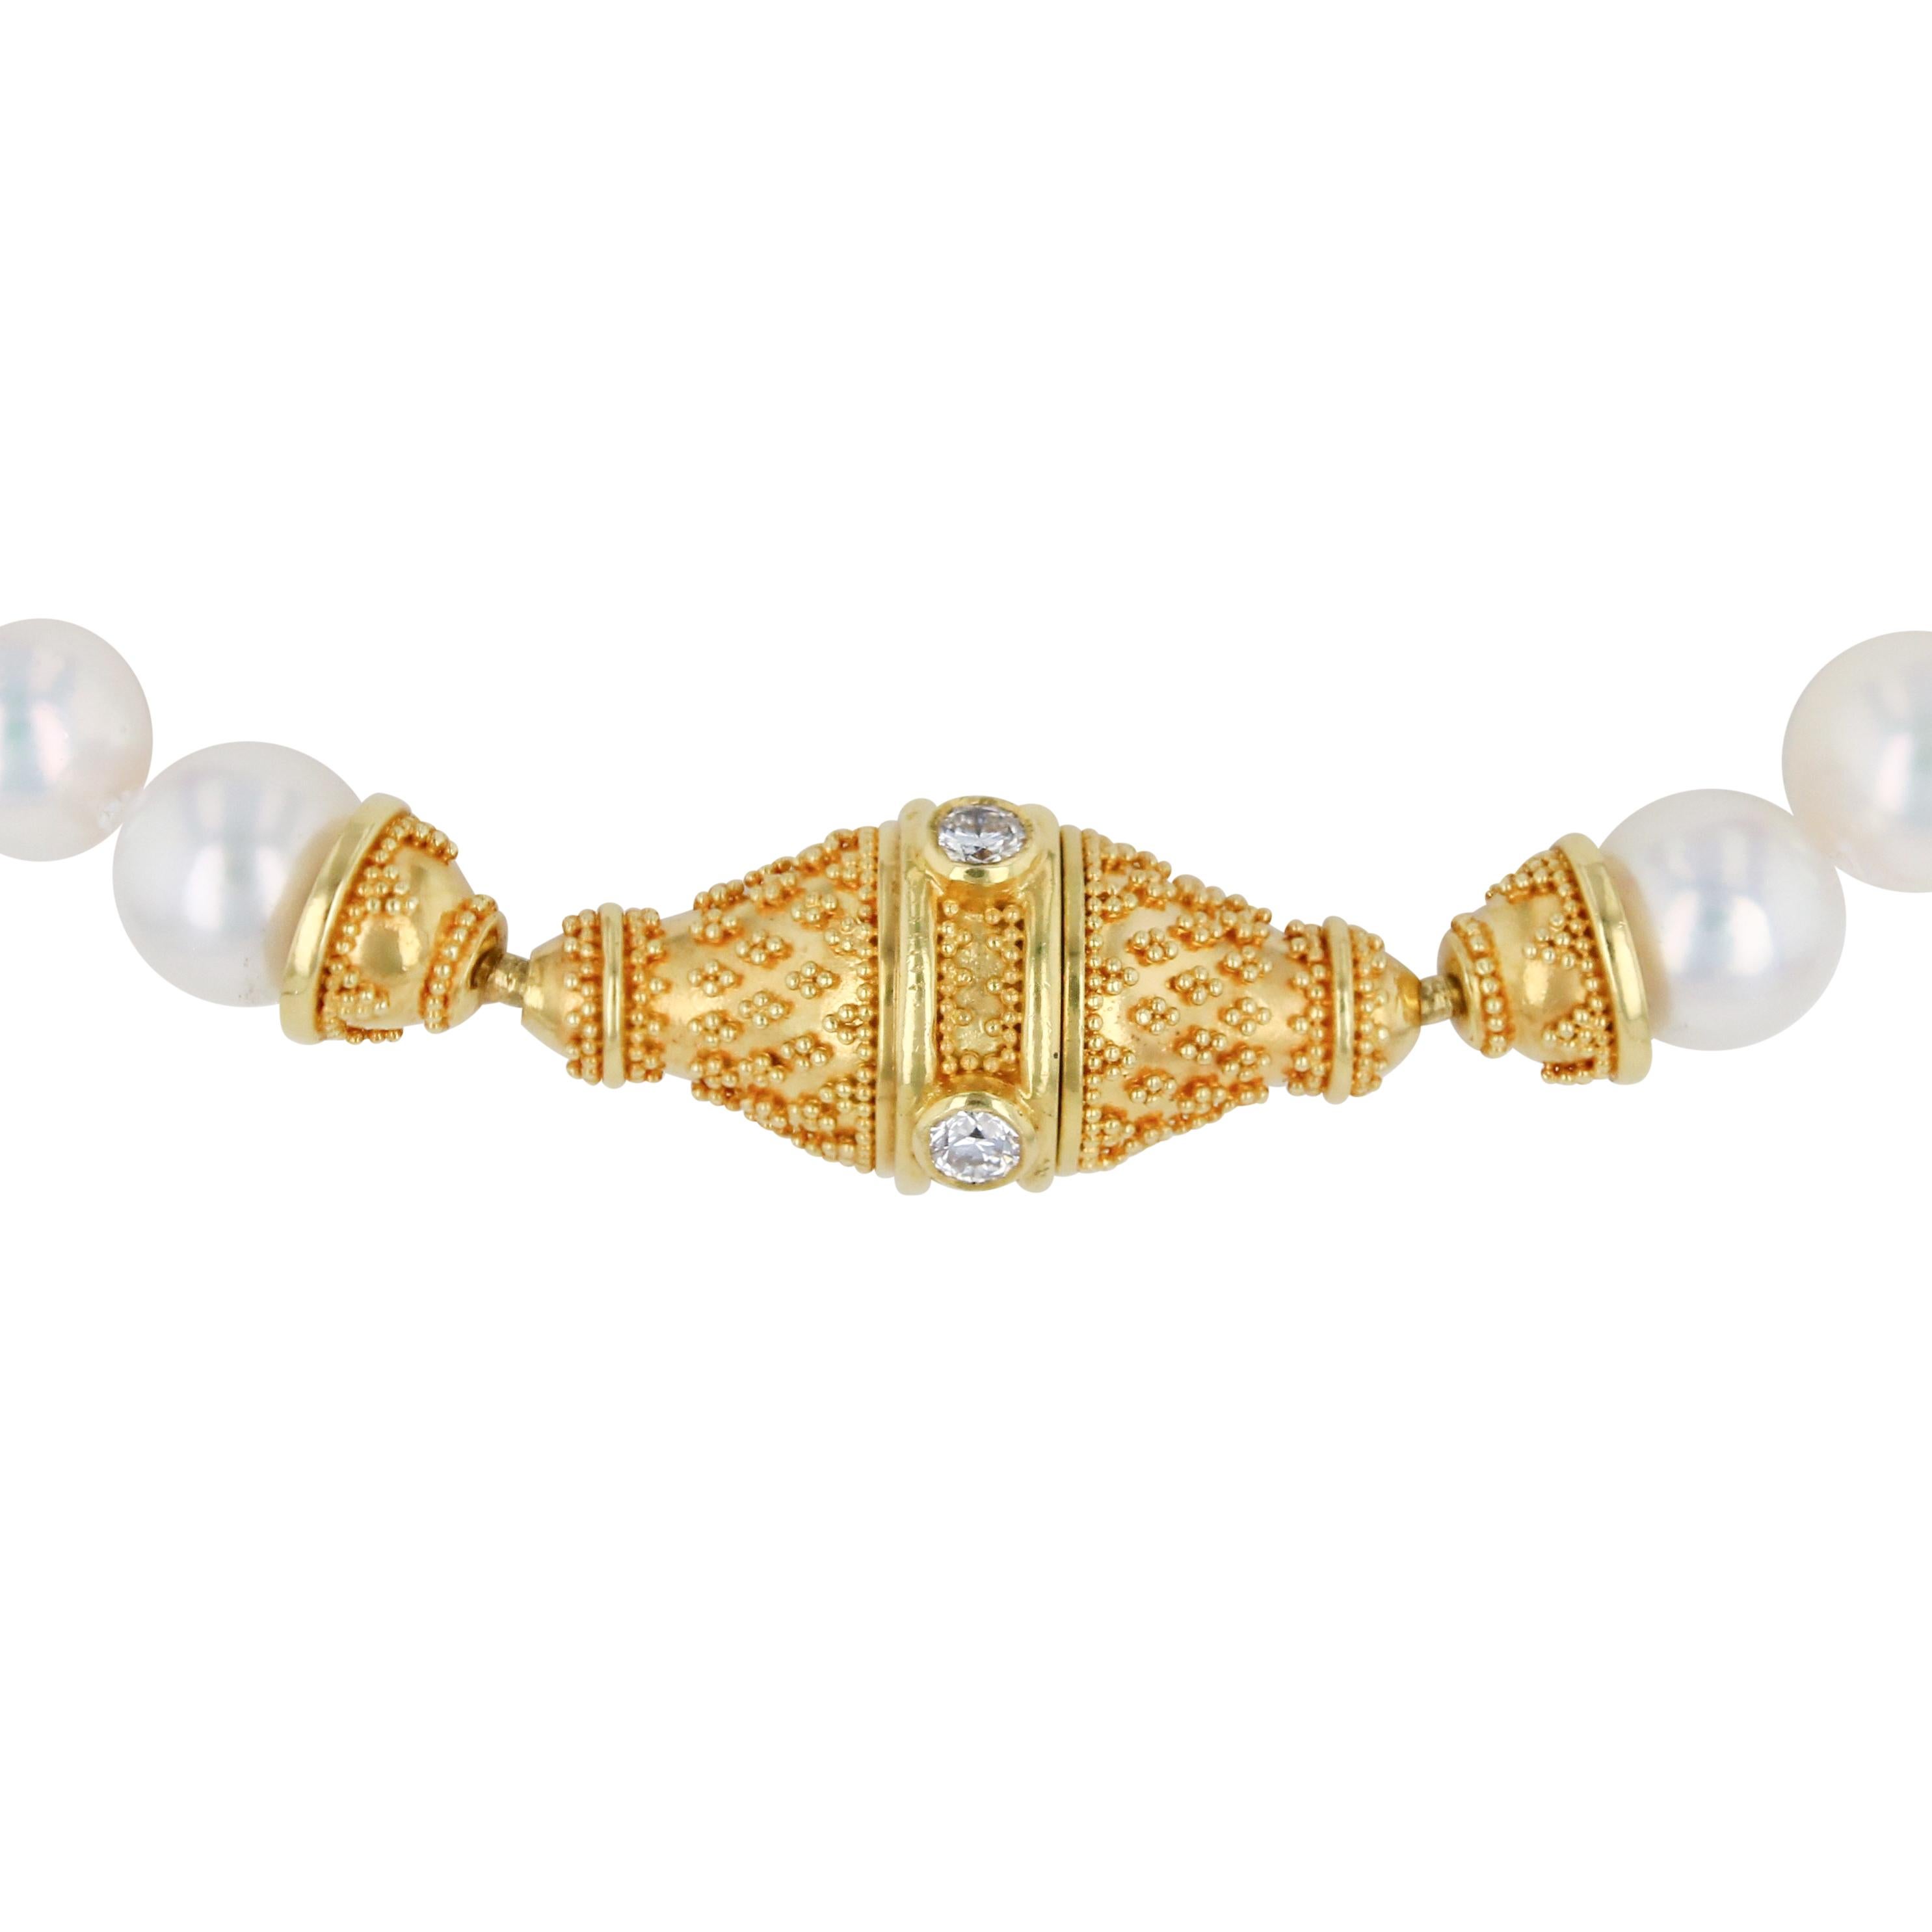 Mixed Cut Kent Raible Akoya Pearl Necklace, 18 K Gold and Diamond clasp with Granulation For Sale